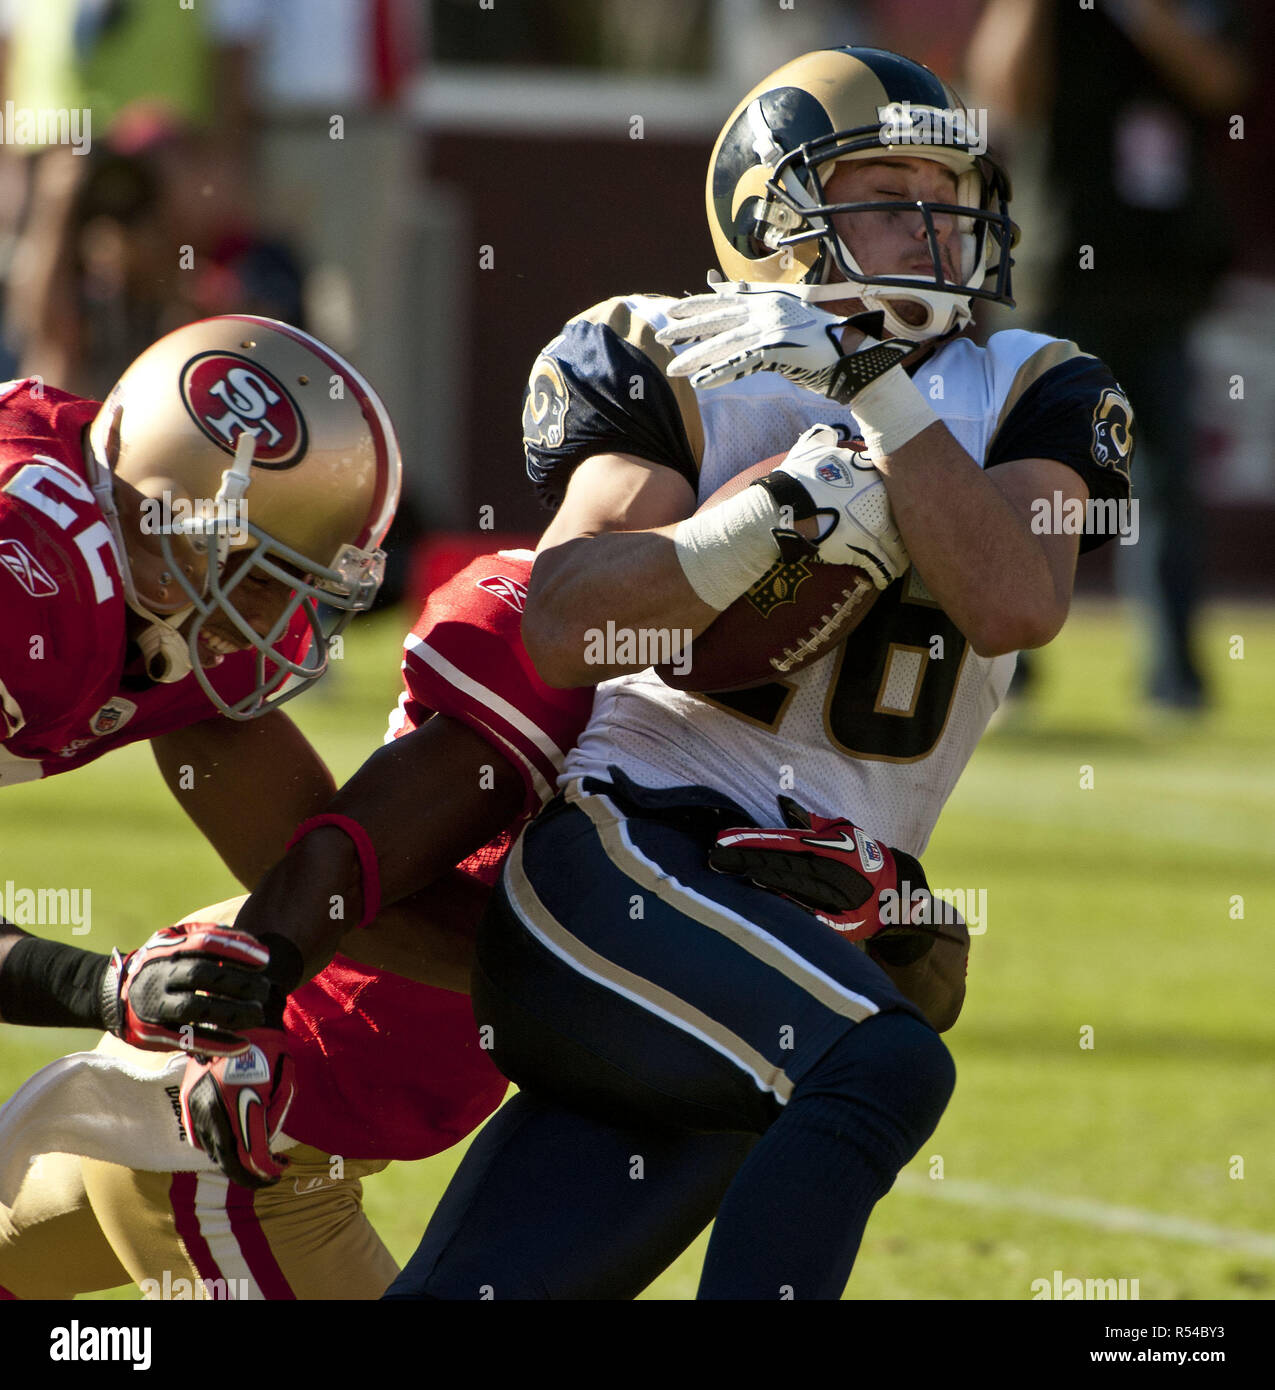 San Francisco, California, USA. 14th Nov, 2010. an Francisco 49ers cornerback Nate Clements #22 and safety Reggie Smith #30 tackle St. Louis Rams wide receiver Danny Amendola #16 on Sunday, November 14, 2010 at Candlestick Park, San Francisco, California. The 49ers defeated the Rams 23-20. Credit: Al Golub/ZUMA Wire/Alamy Live News Stock Photo